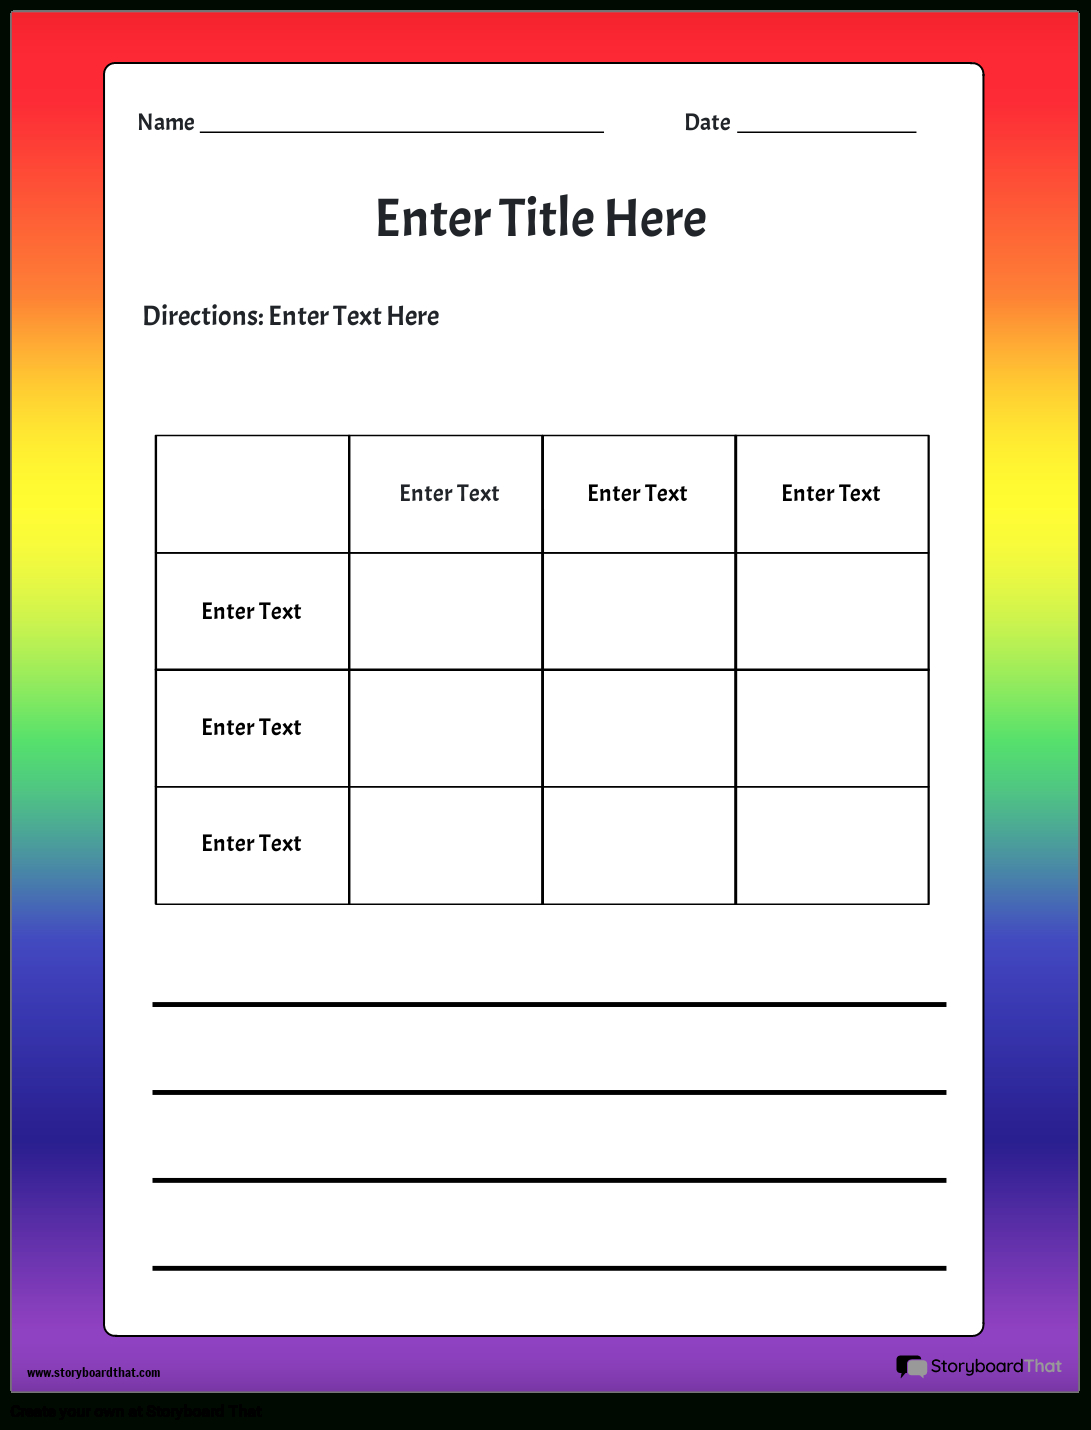 Free Printable Logic Puzzles For Critical Thinking - Logic Puzzles Free Online Printable